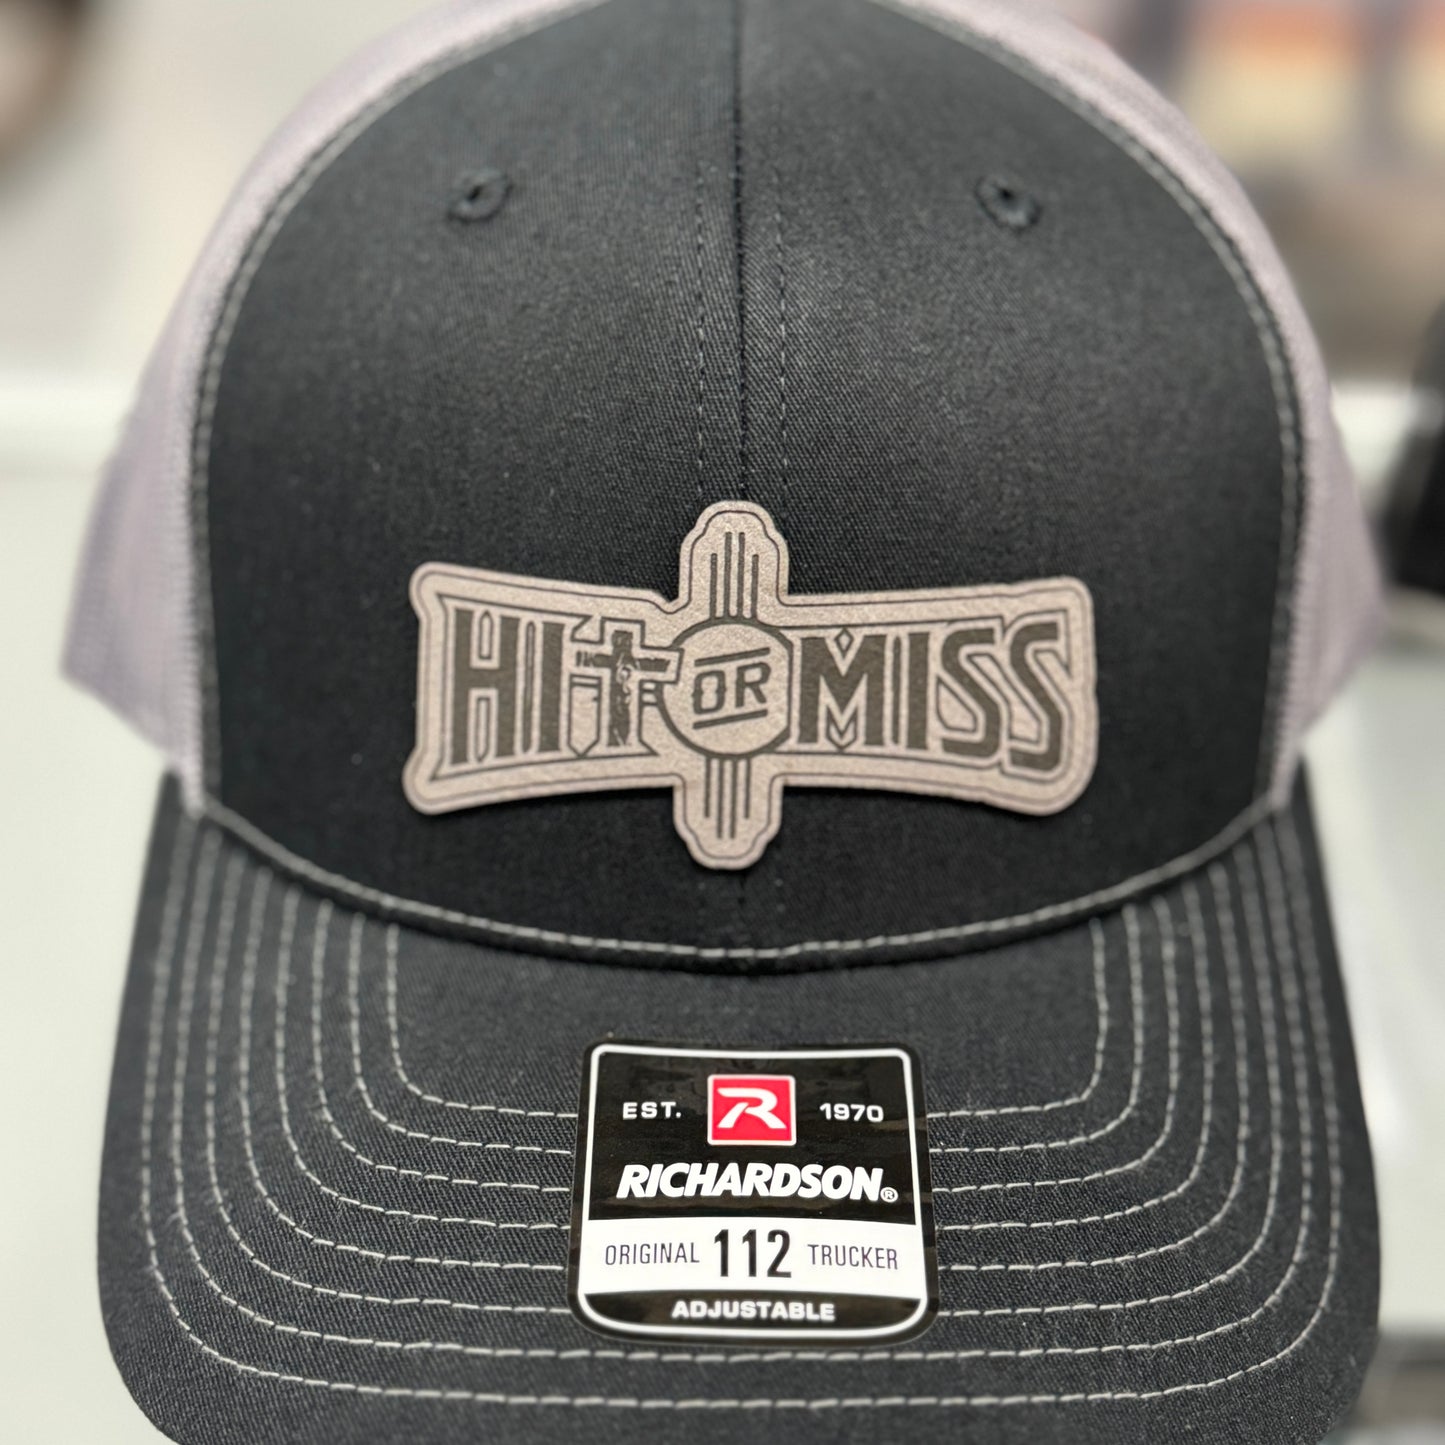 Hit or Miss Patch Hats